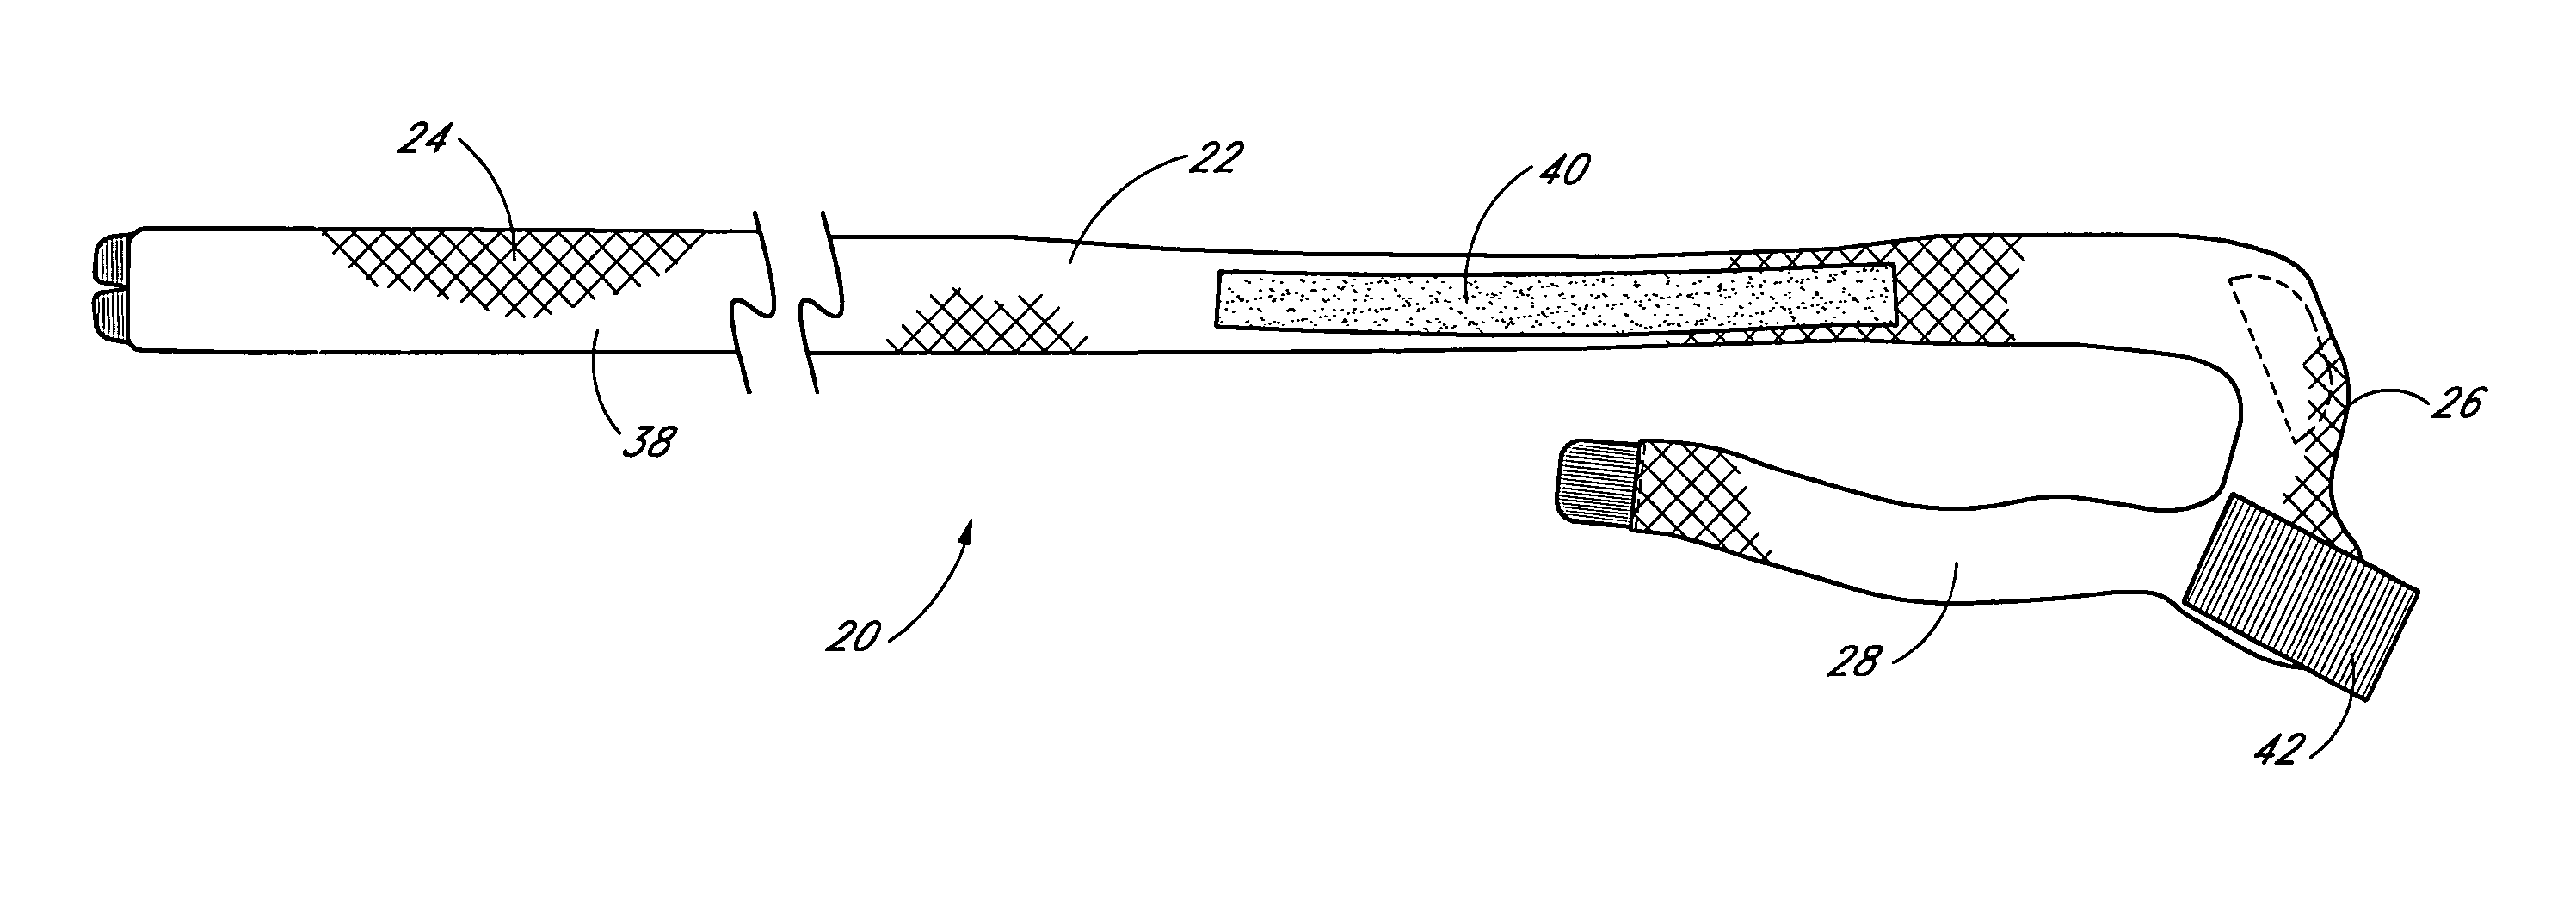 Device and method for externally rotating the femur